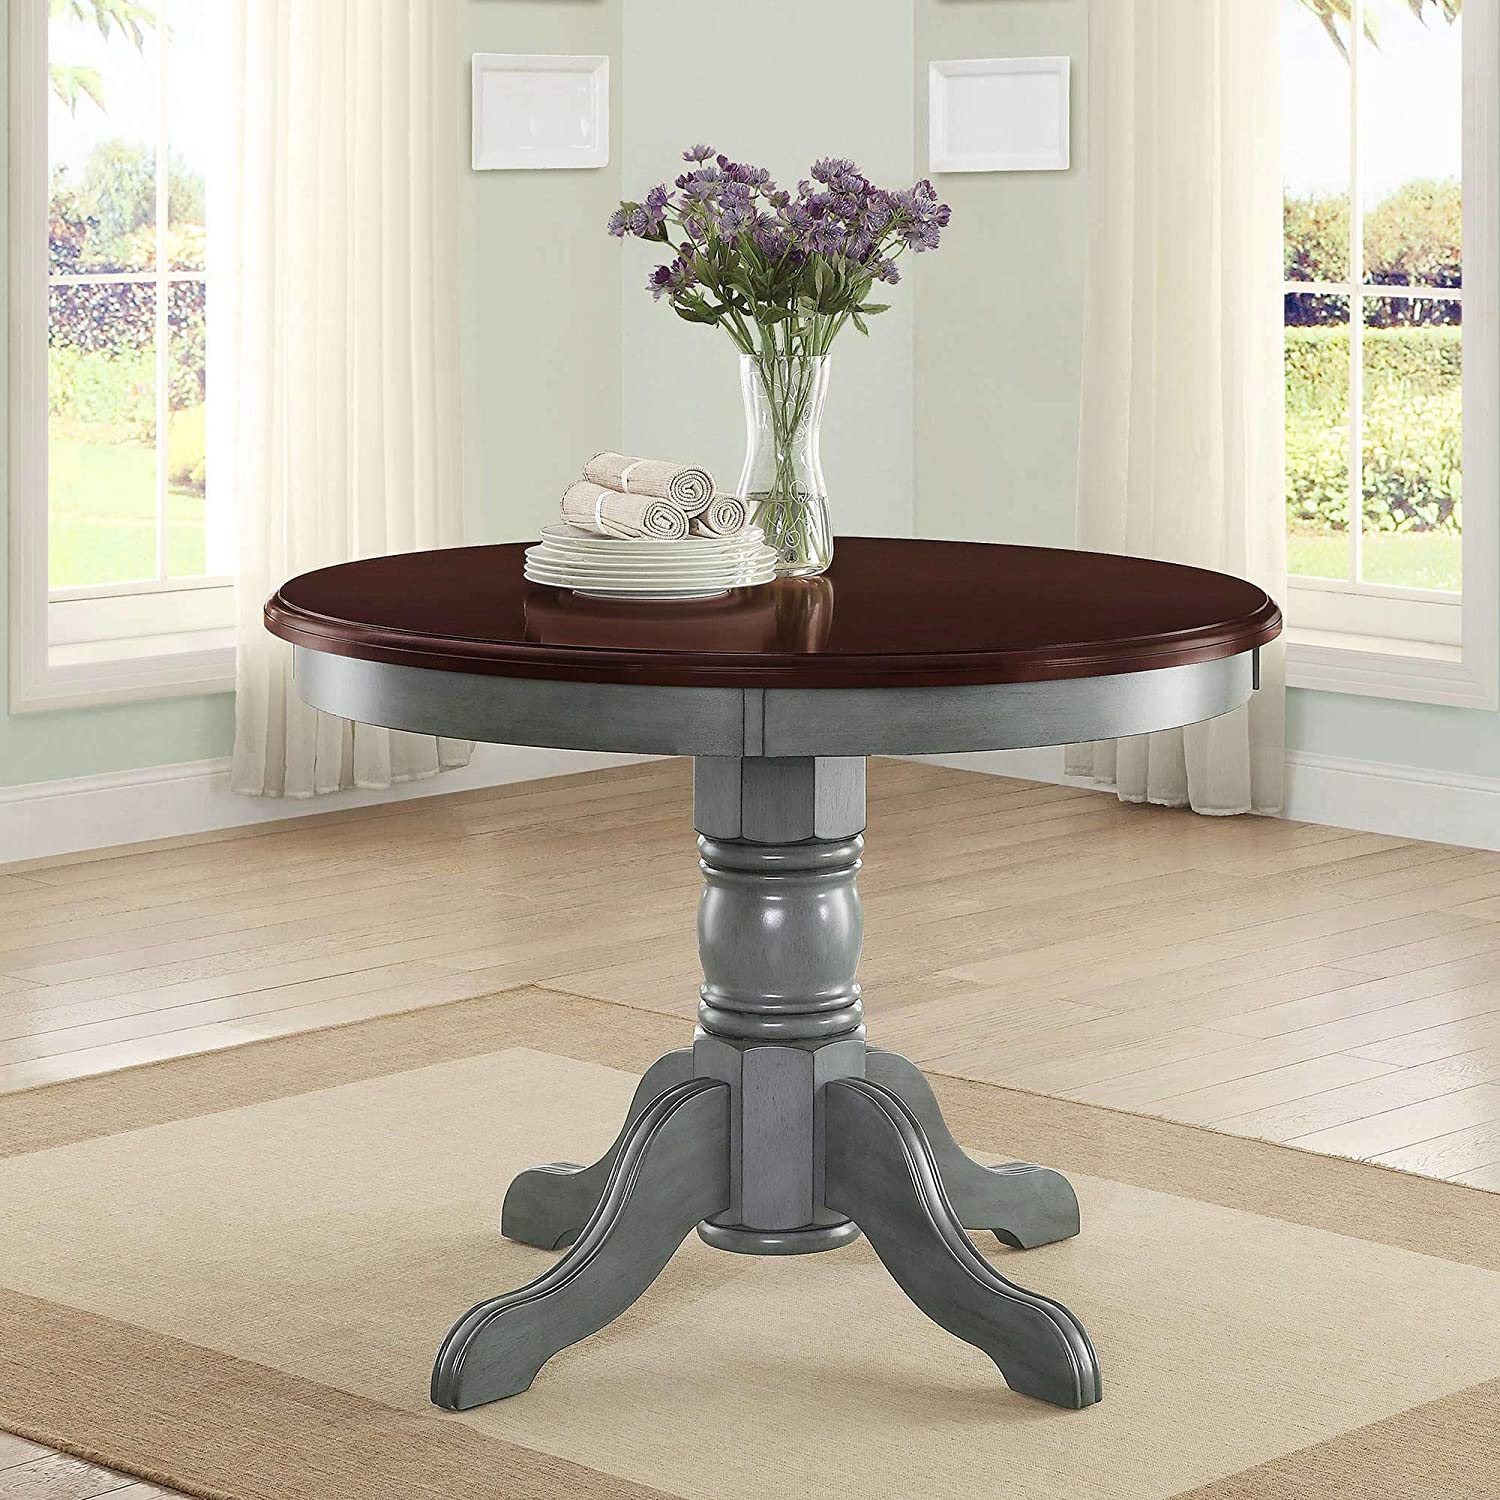 B01HQ72CQO 42" Round Table Top, Easily Accommodates Seating for 4, Multi-Step, Blue